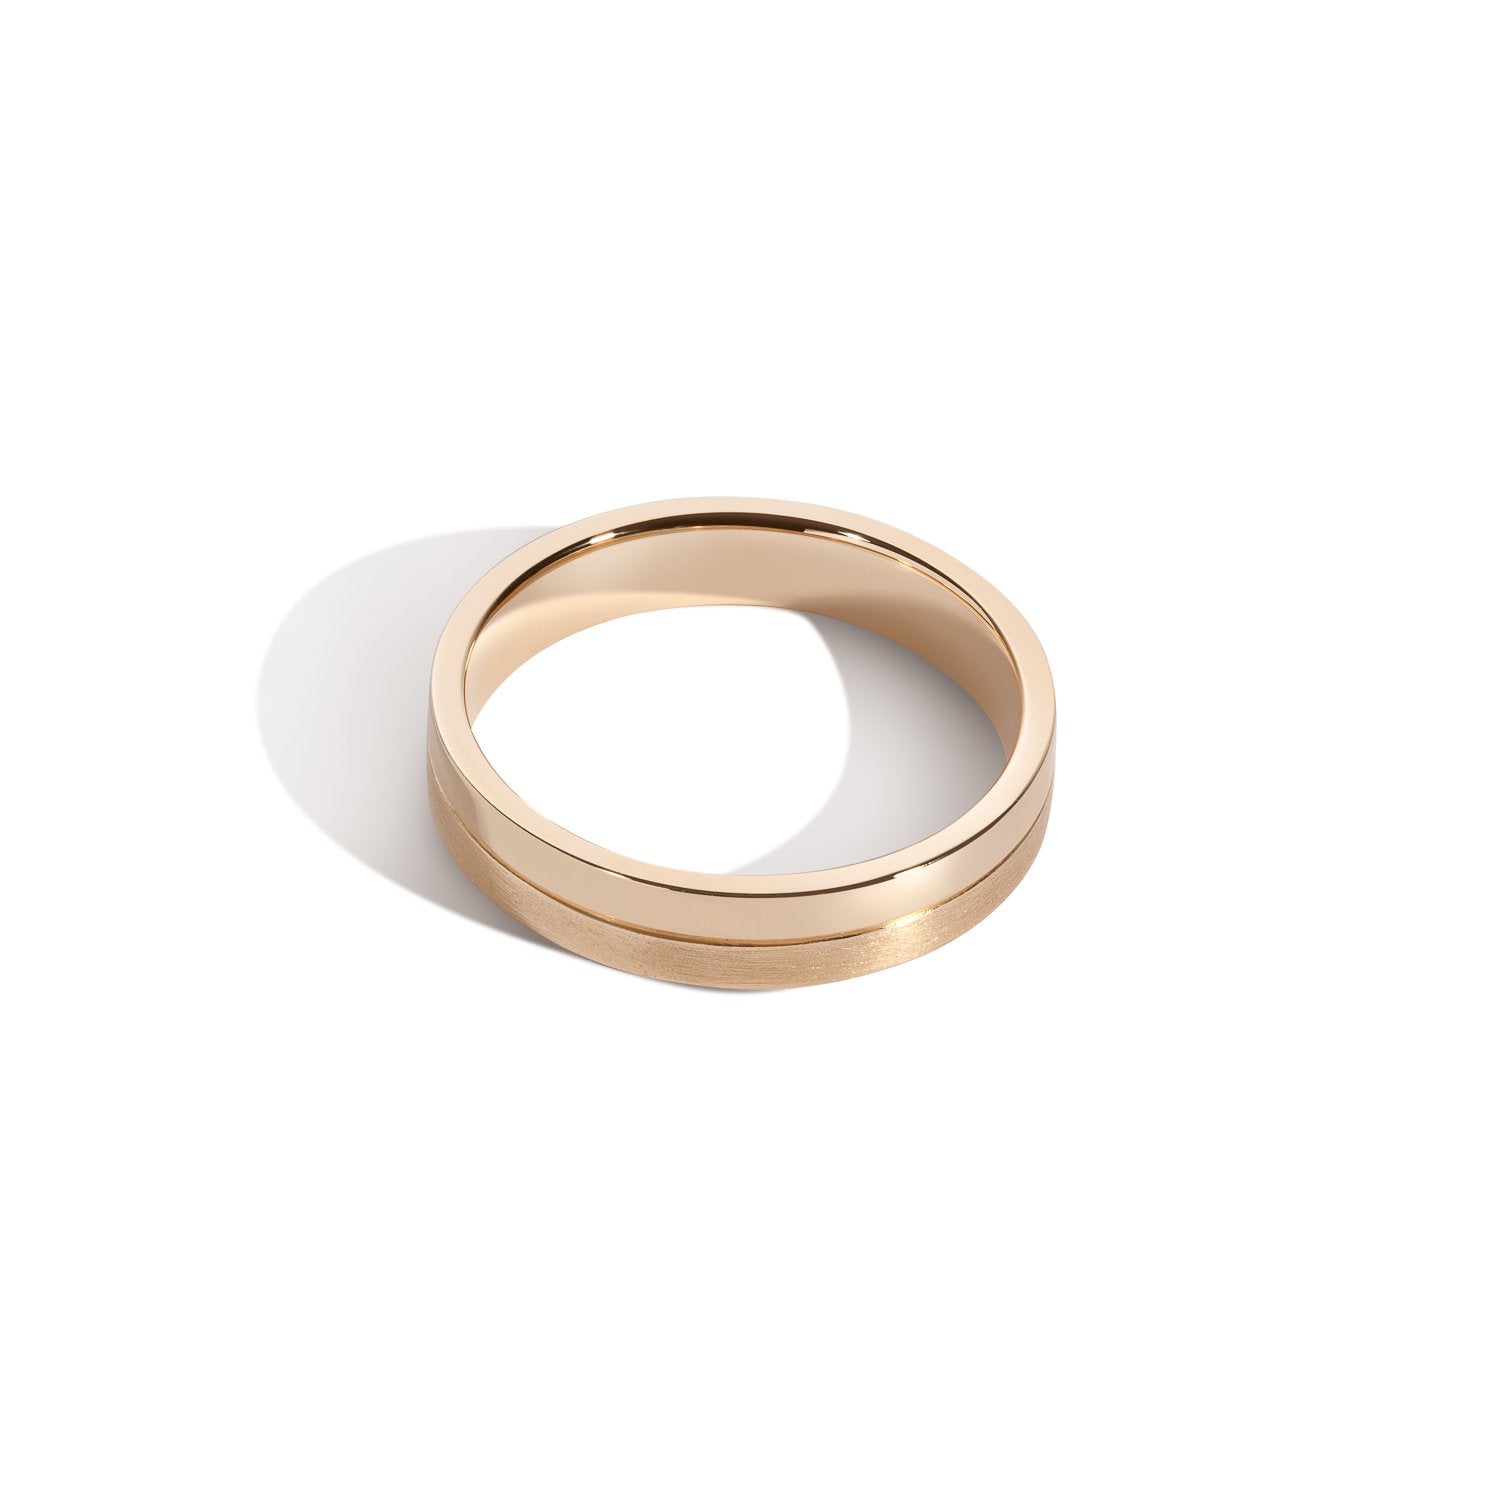 IN STOCK Every Love Horizontal Better Half Yellow Gold Band - Size 8